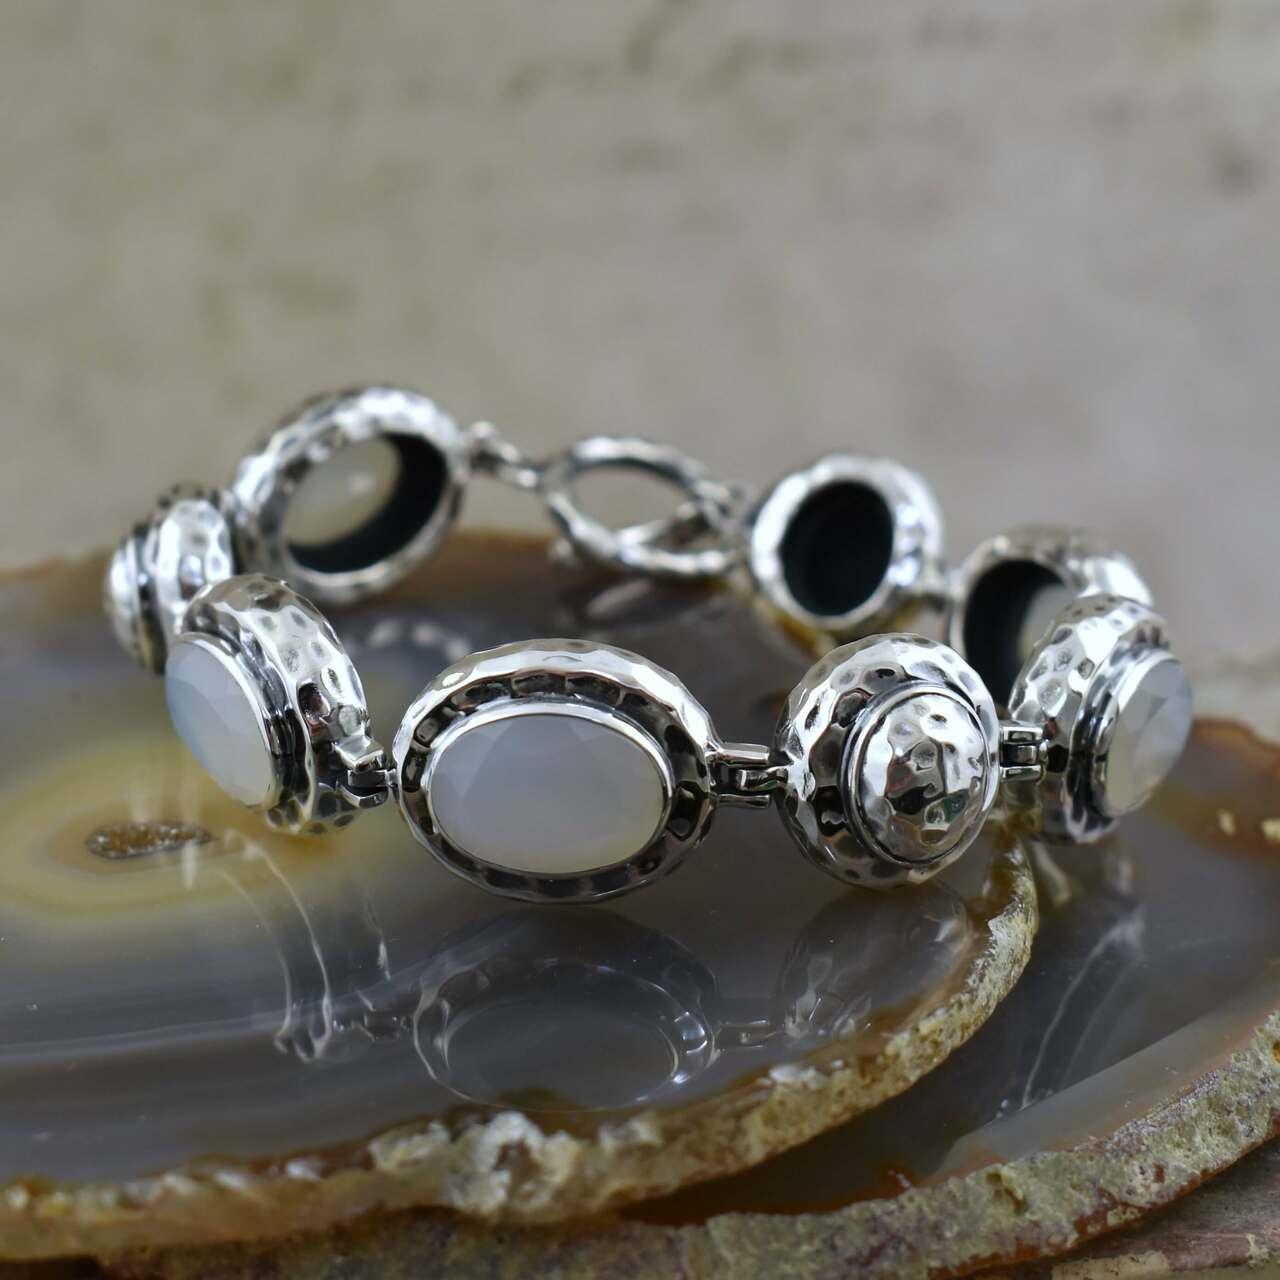 Summer Nights Bracelet in sterling silver and genuine white chalcedony